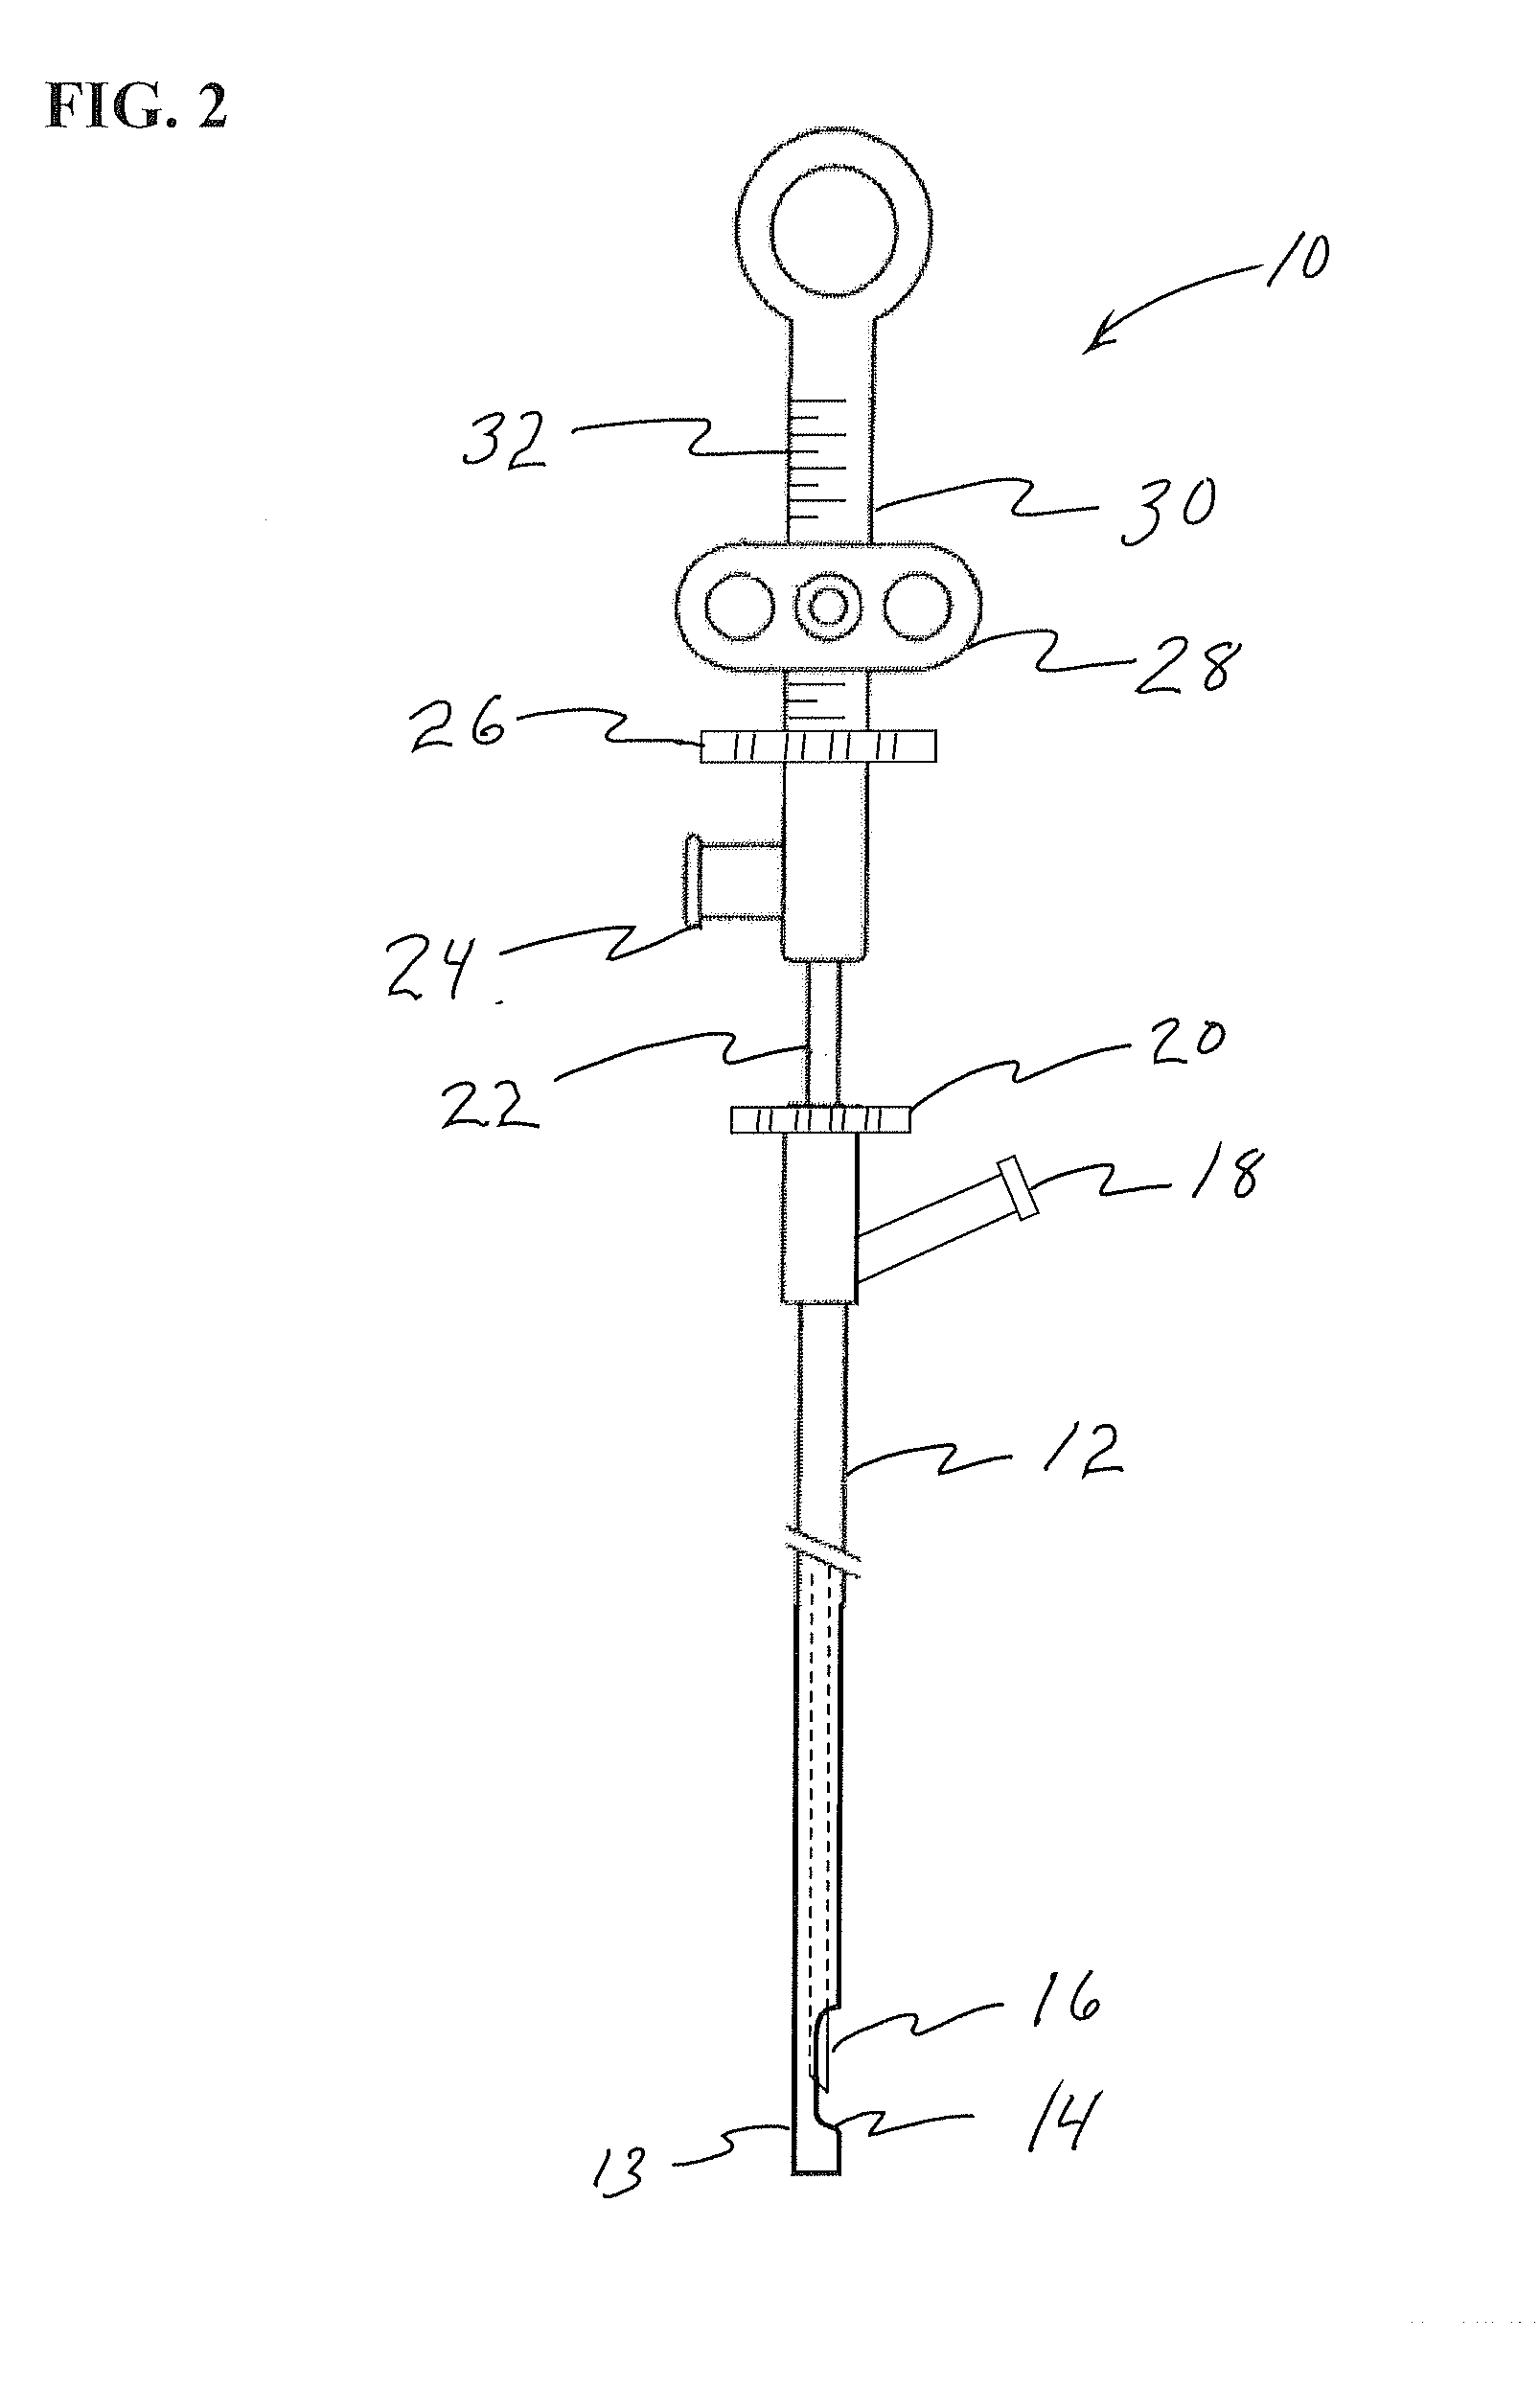 Methods and Systems for Performing Submucosal Medical Procedures